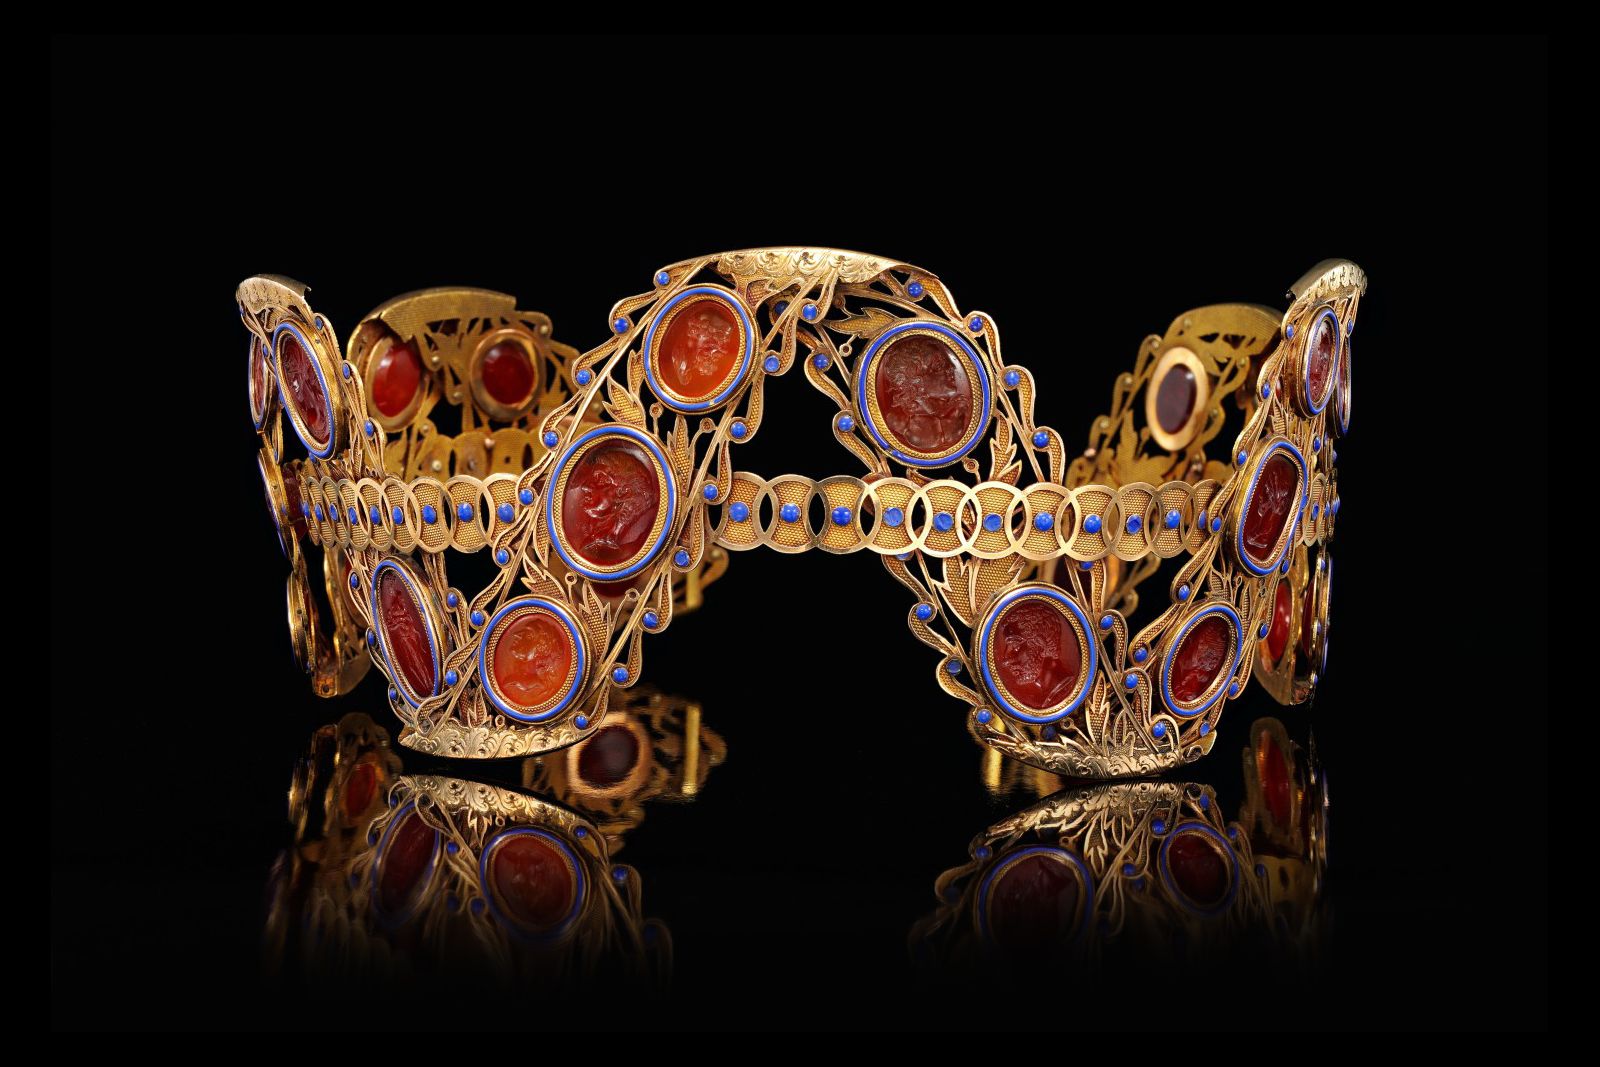 A carnelian, enamel and gold diadem once owned by Joséphine Bonaparte, Empress of France, sold by Sotheby’s in 2021